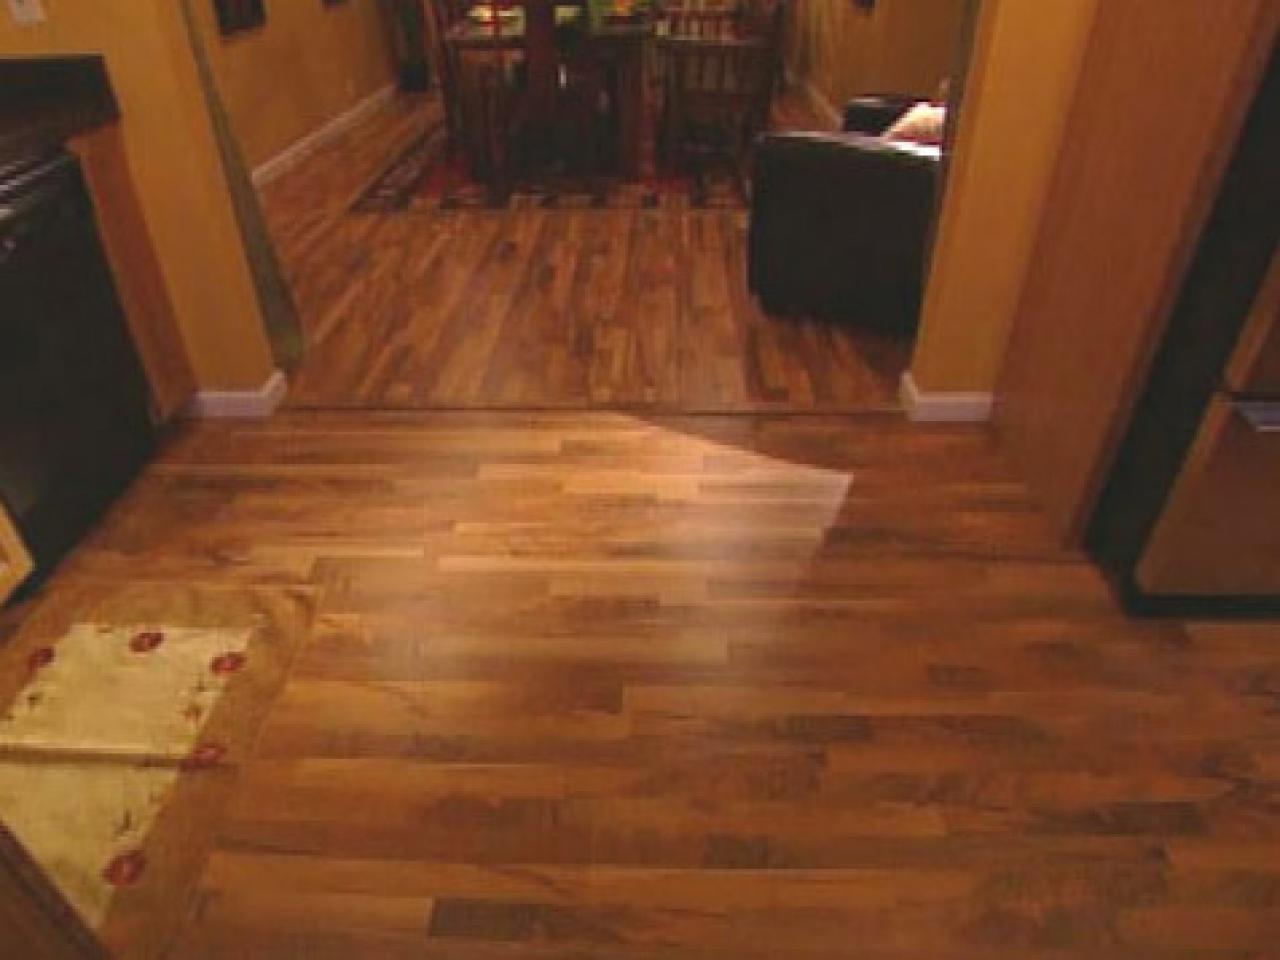 Install Tongue And Groove Wood Veneer, How To Add Hardwood Existing Floor